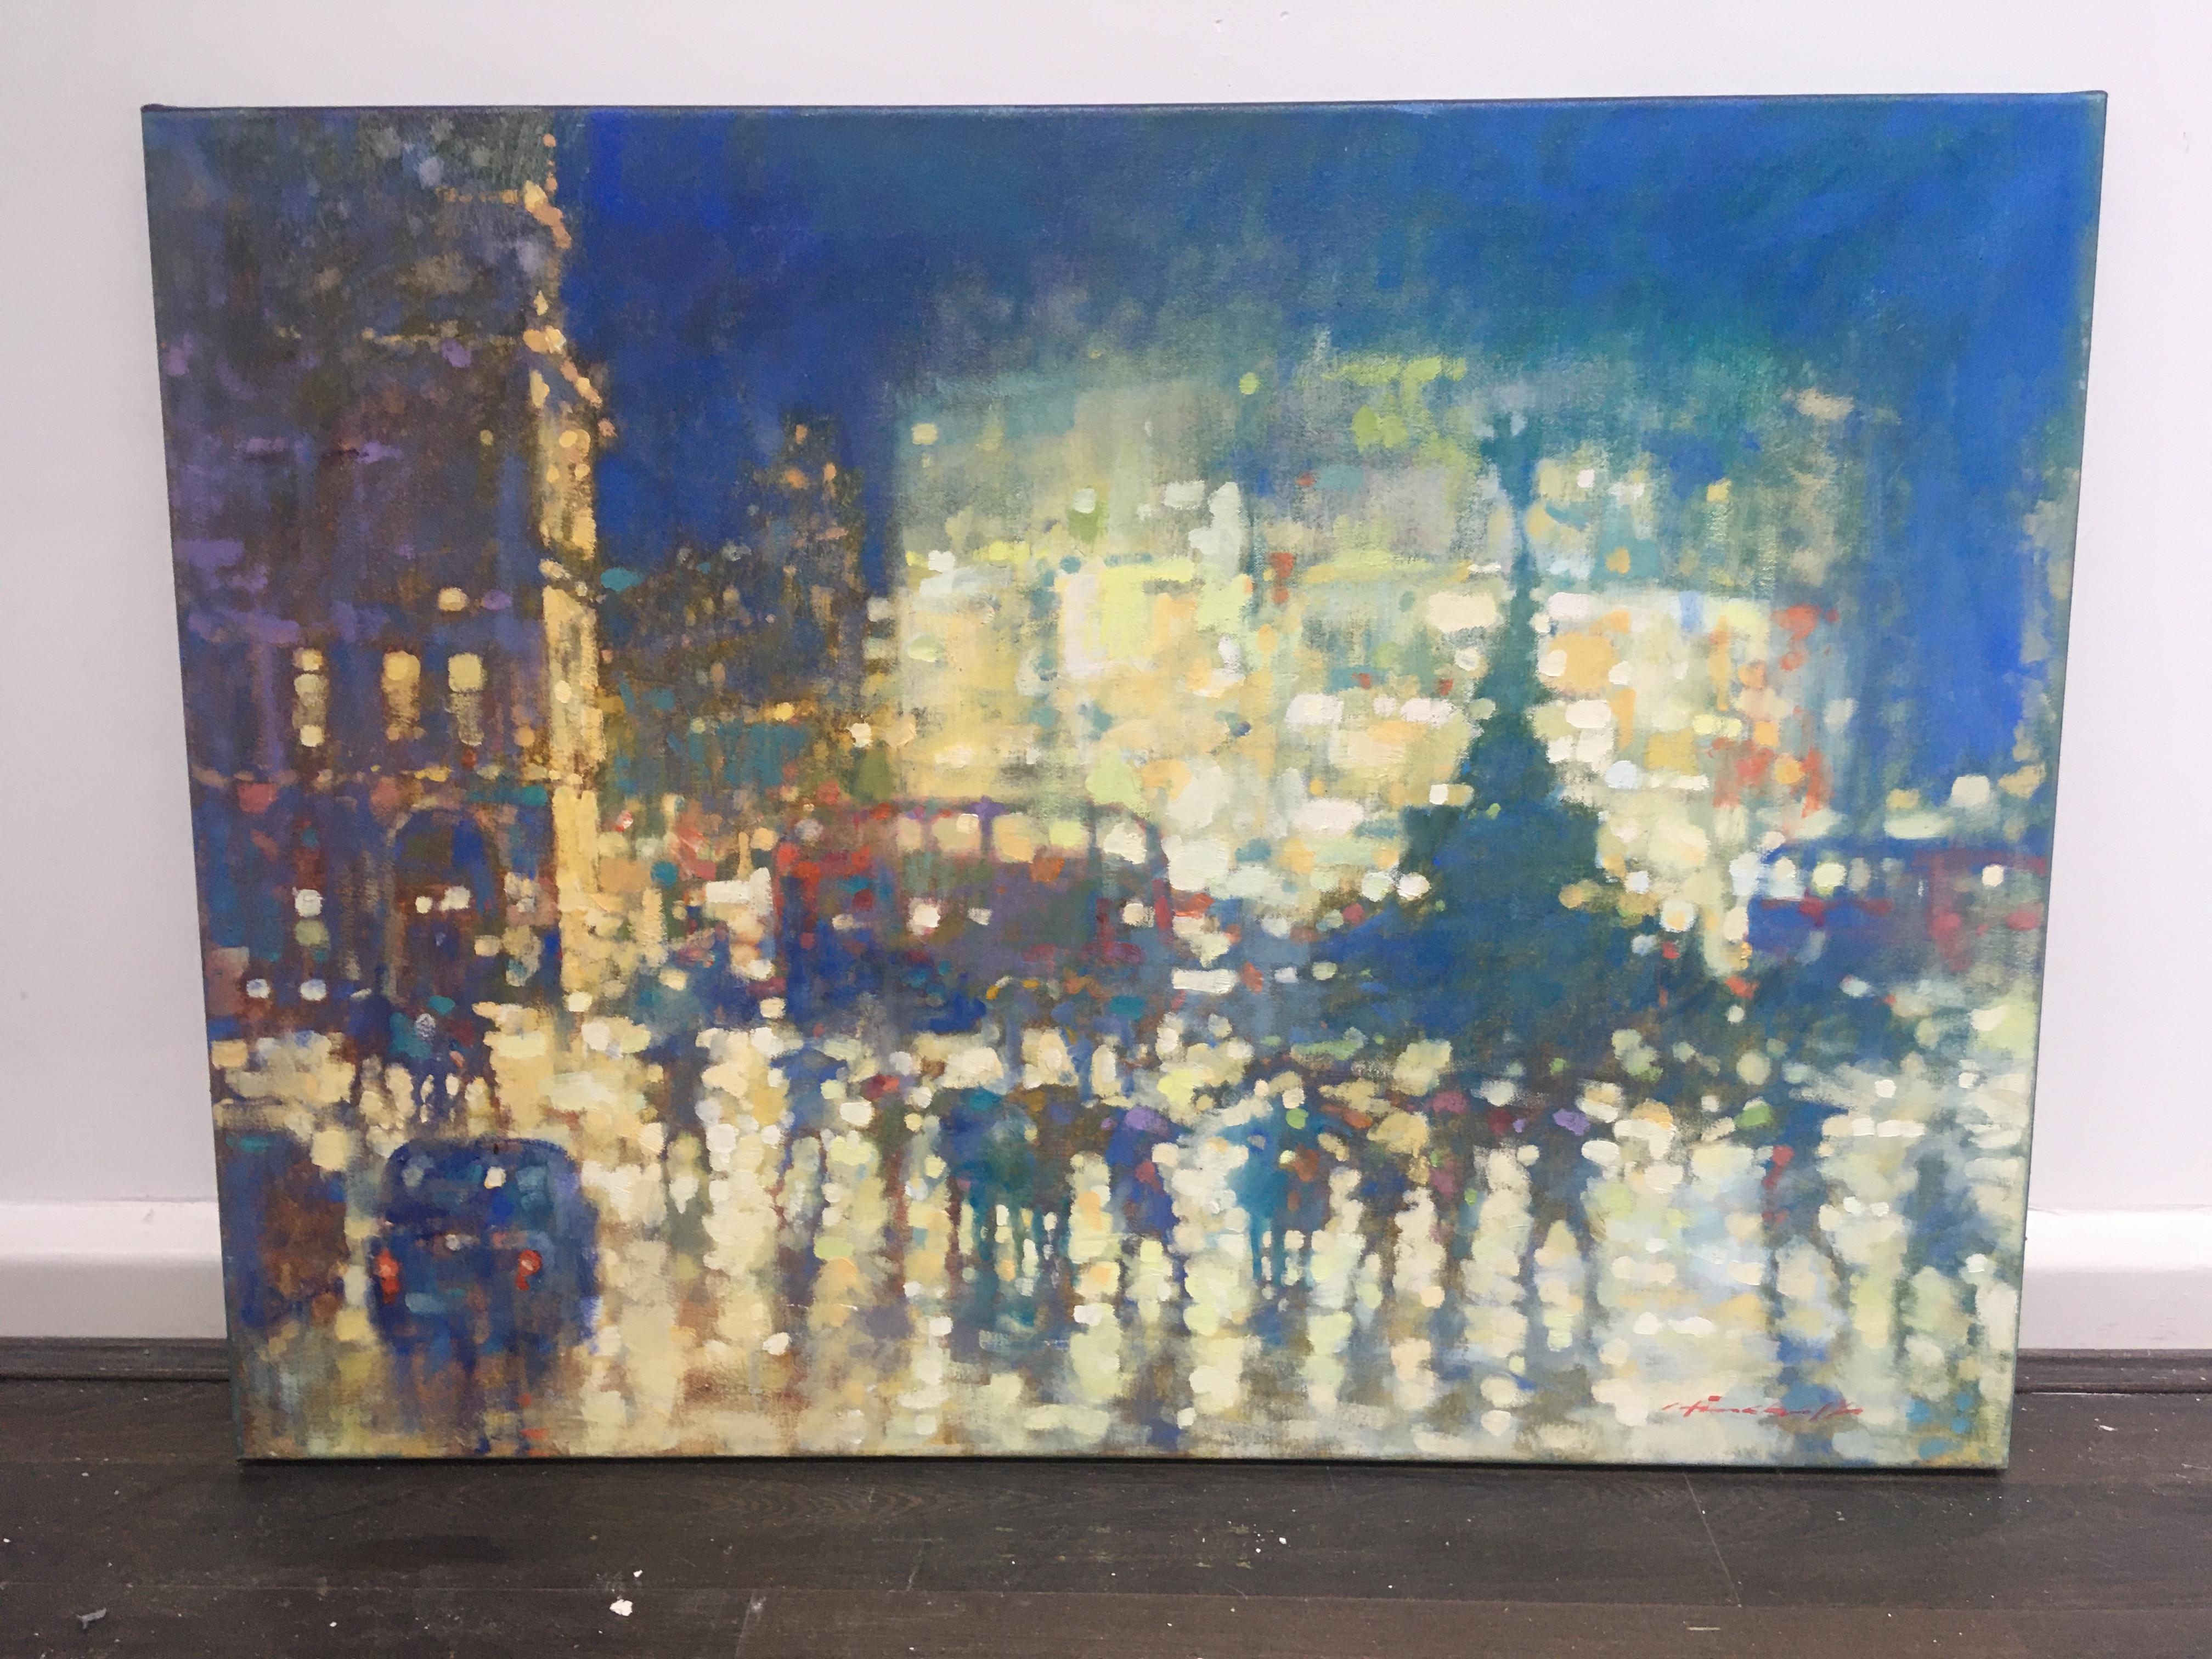 Backlit - contemporary impressionism, night London cityscape oil painting - Painting by David Hinchliffe